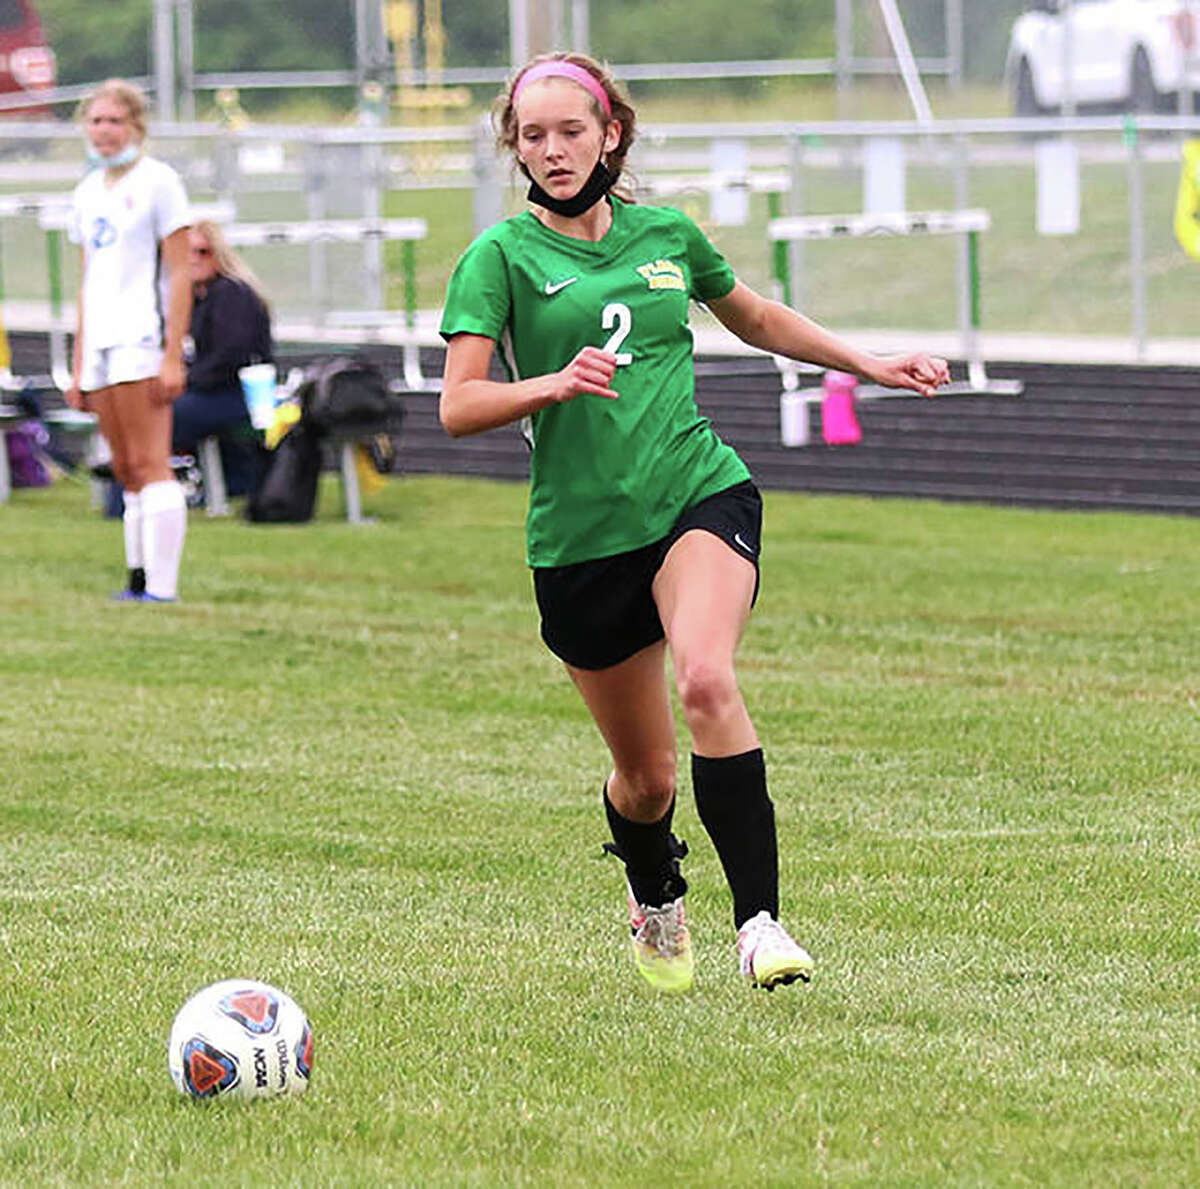 Ali Wilson of Southwestern scored a pair of goals and the Piasa Birds went on to shut out Springfield Lutheran 4-0 Monday in Piasa.